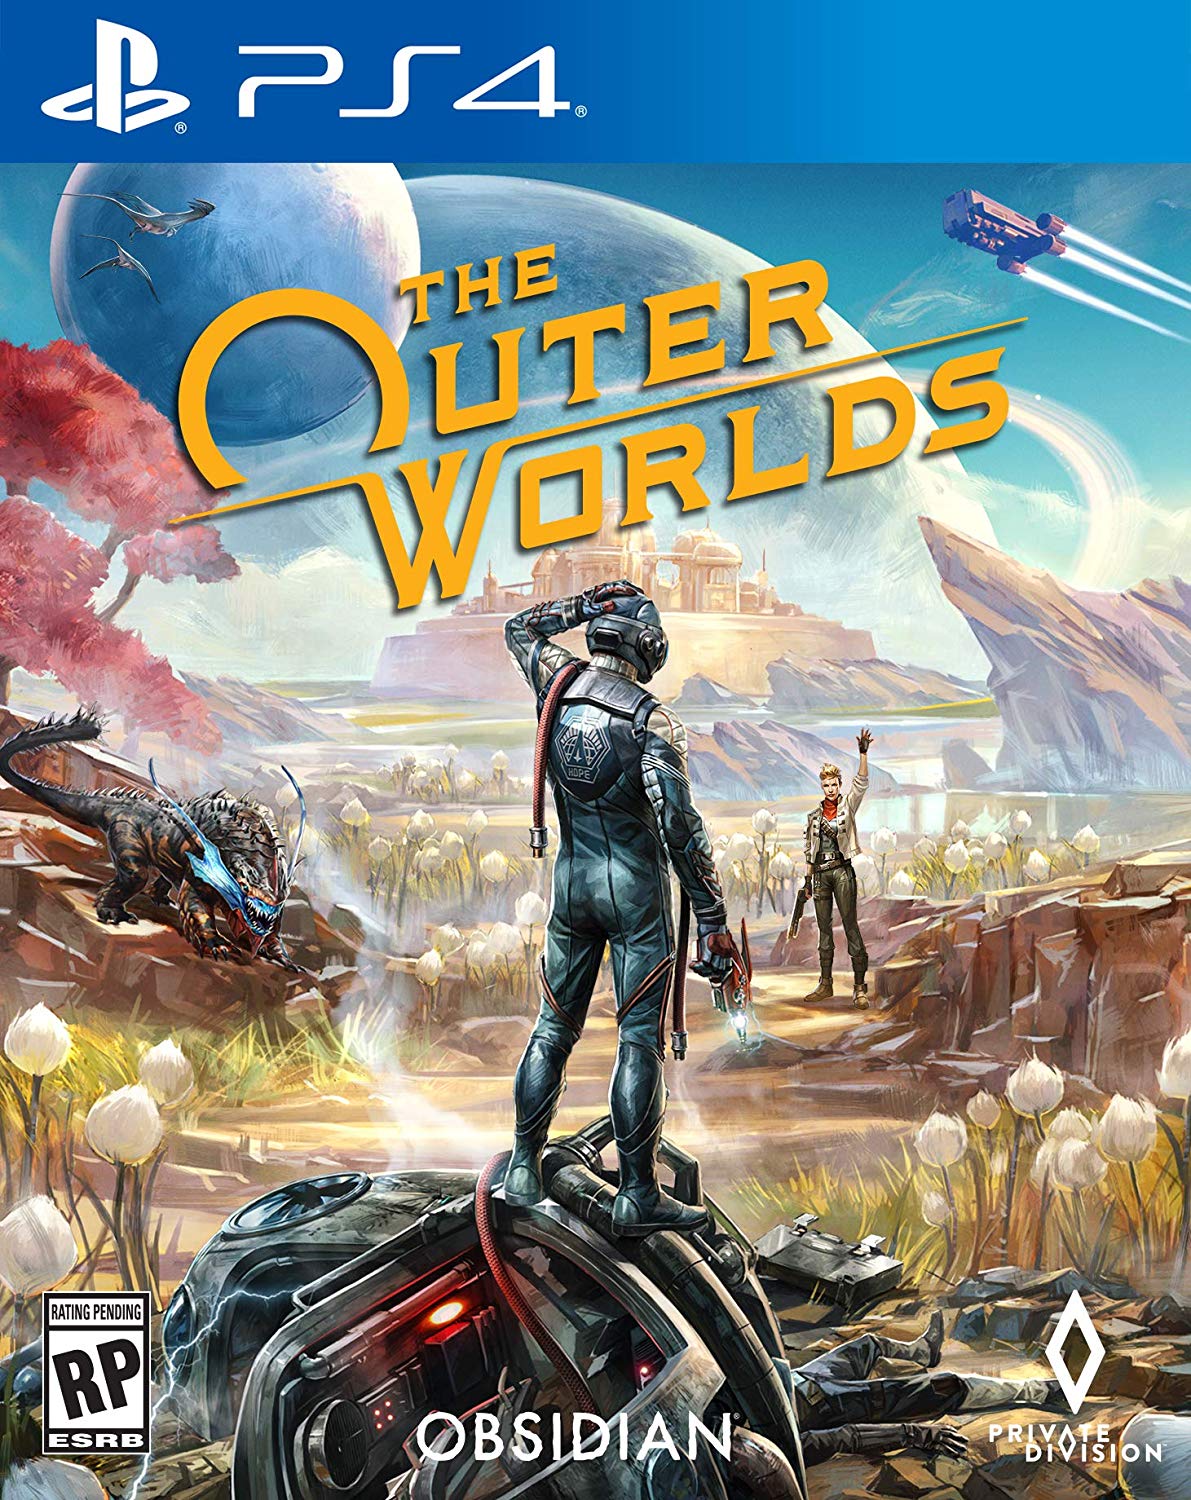 the-outer-worlds-box-art-ps4.jpg